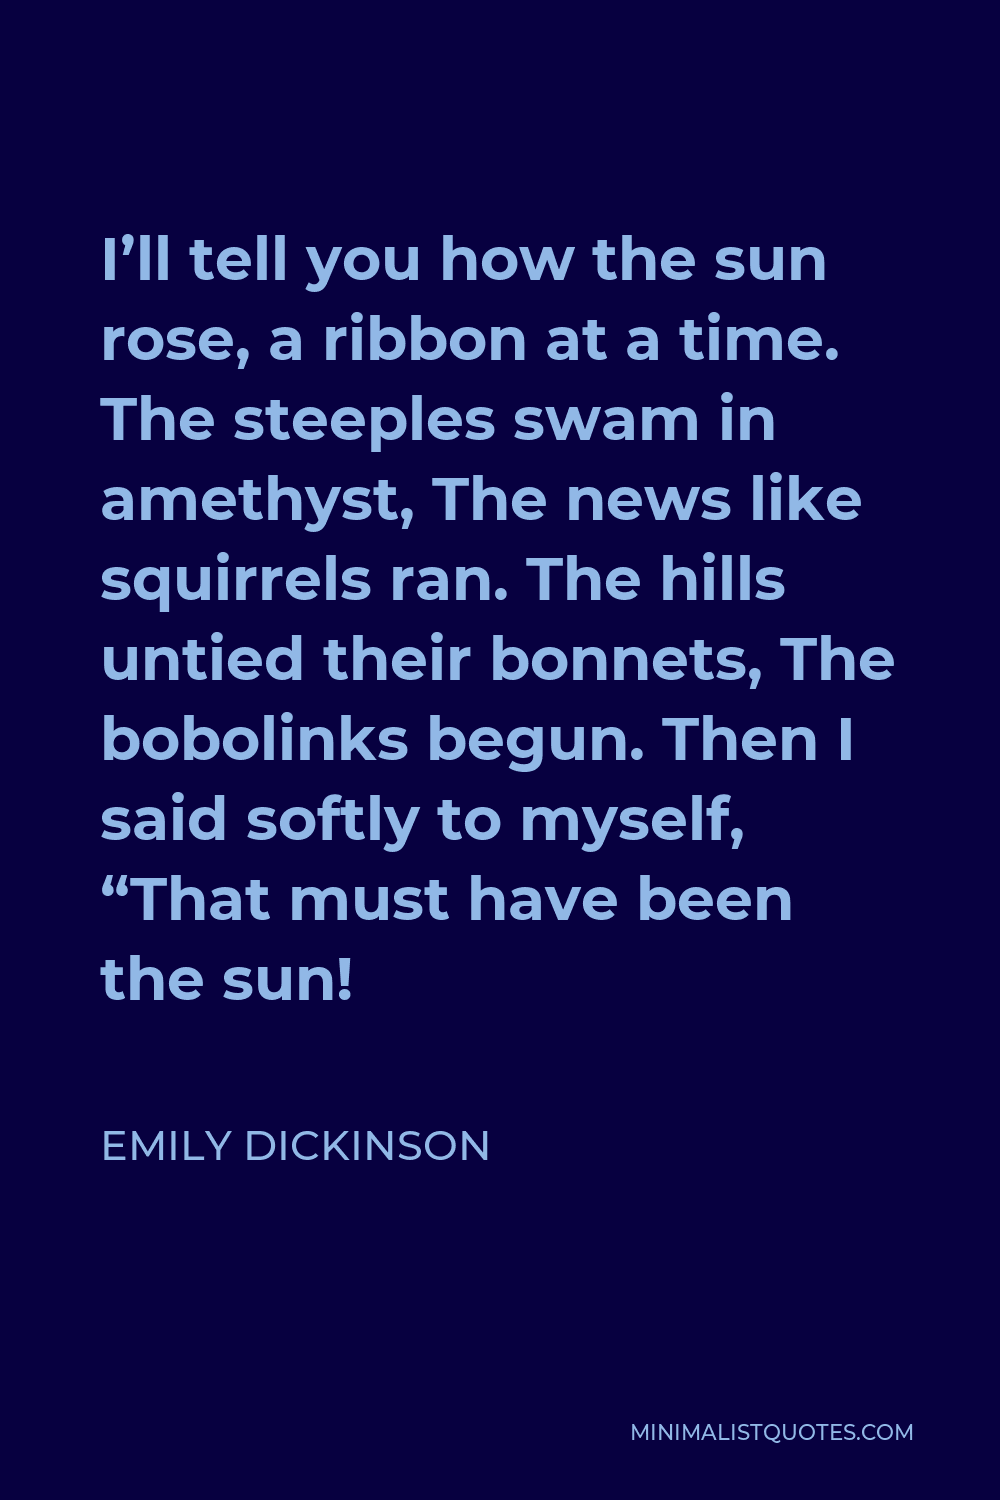 Emily Dickinson Quote - I’ll tell you how the sun rose, a ribbon at a time. The steeples swam in amethyst, The news like squirrels ran. The hills untied their bonnets, The bobolinks begun. Then I said softly to myself, “That must have been the sun!